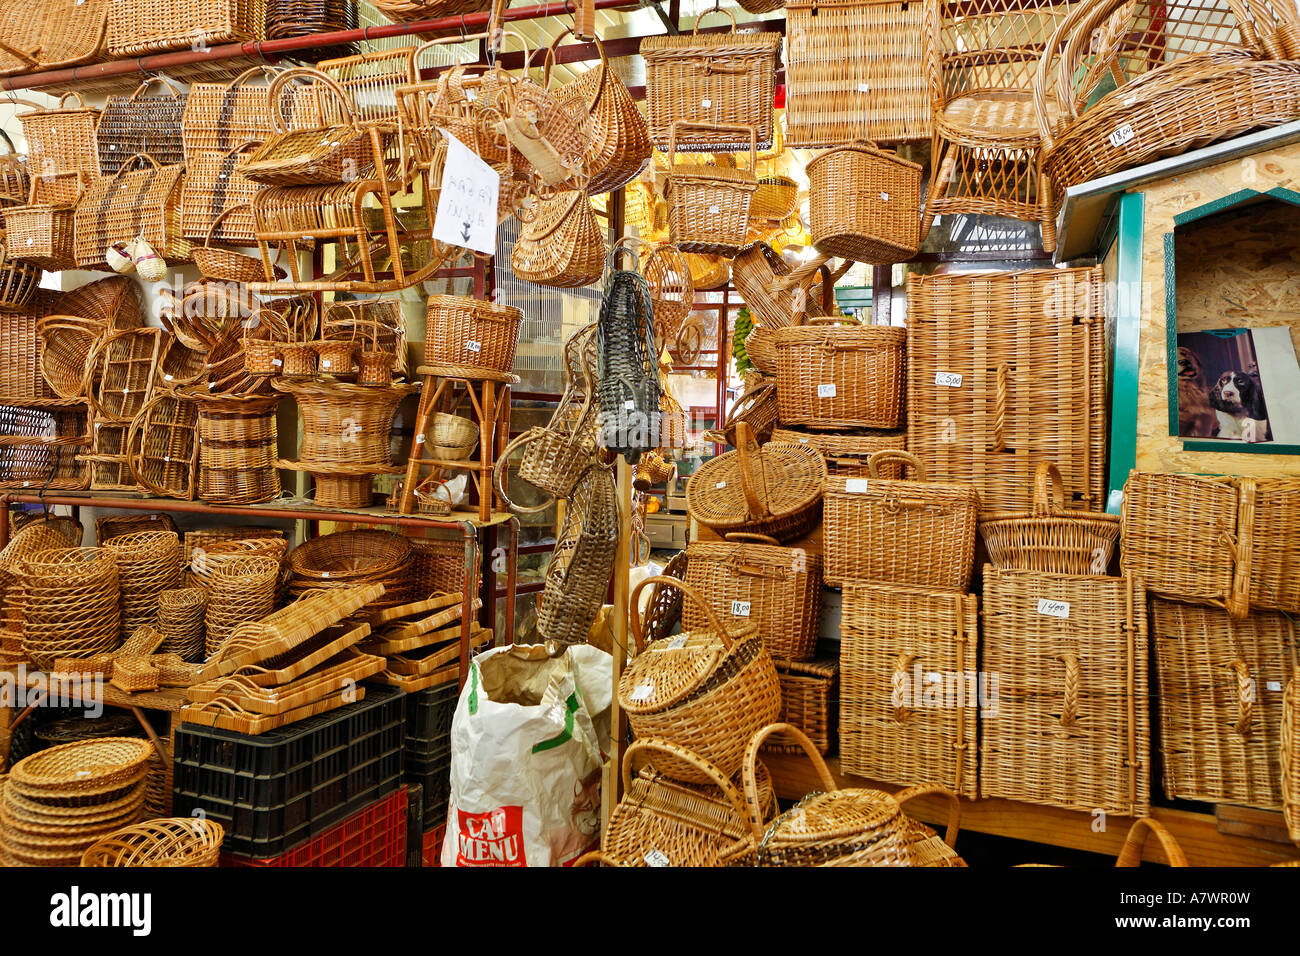 Handmade baskets in the market hall, Funchal, Madeira, Portugal Stock Photo